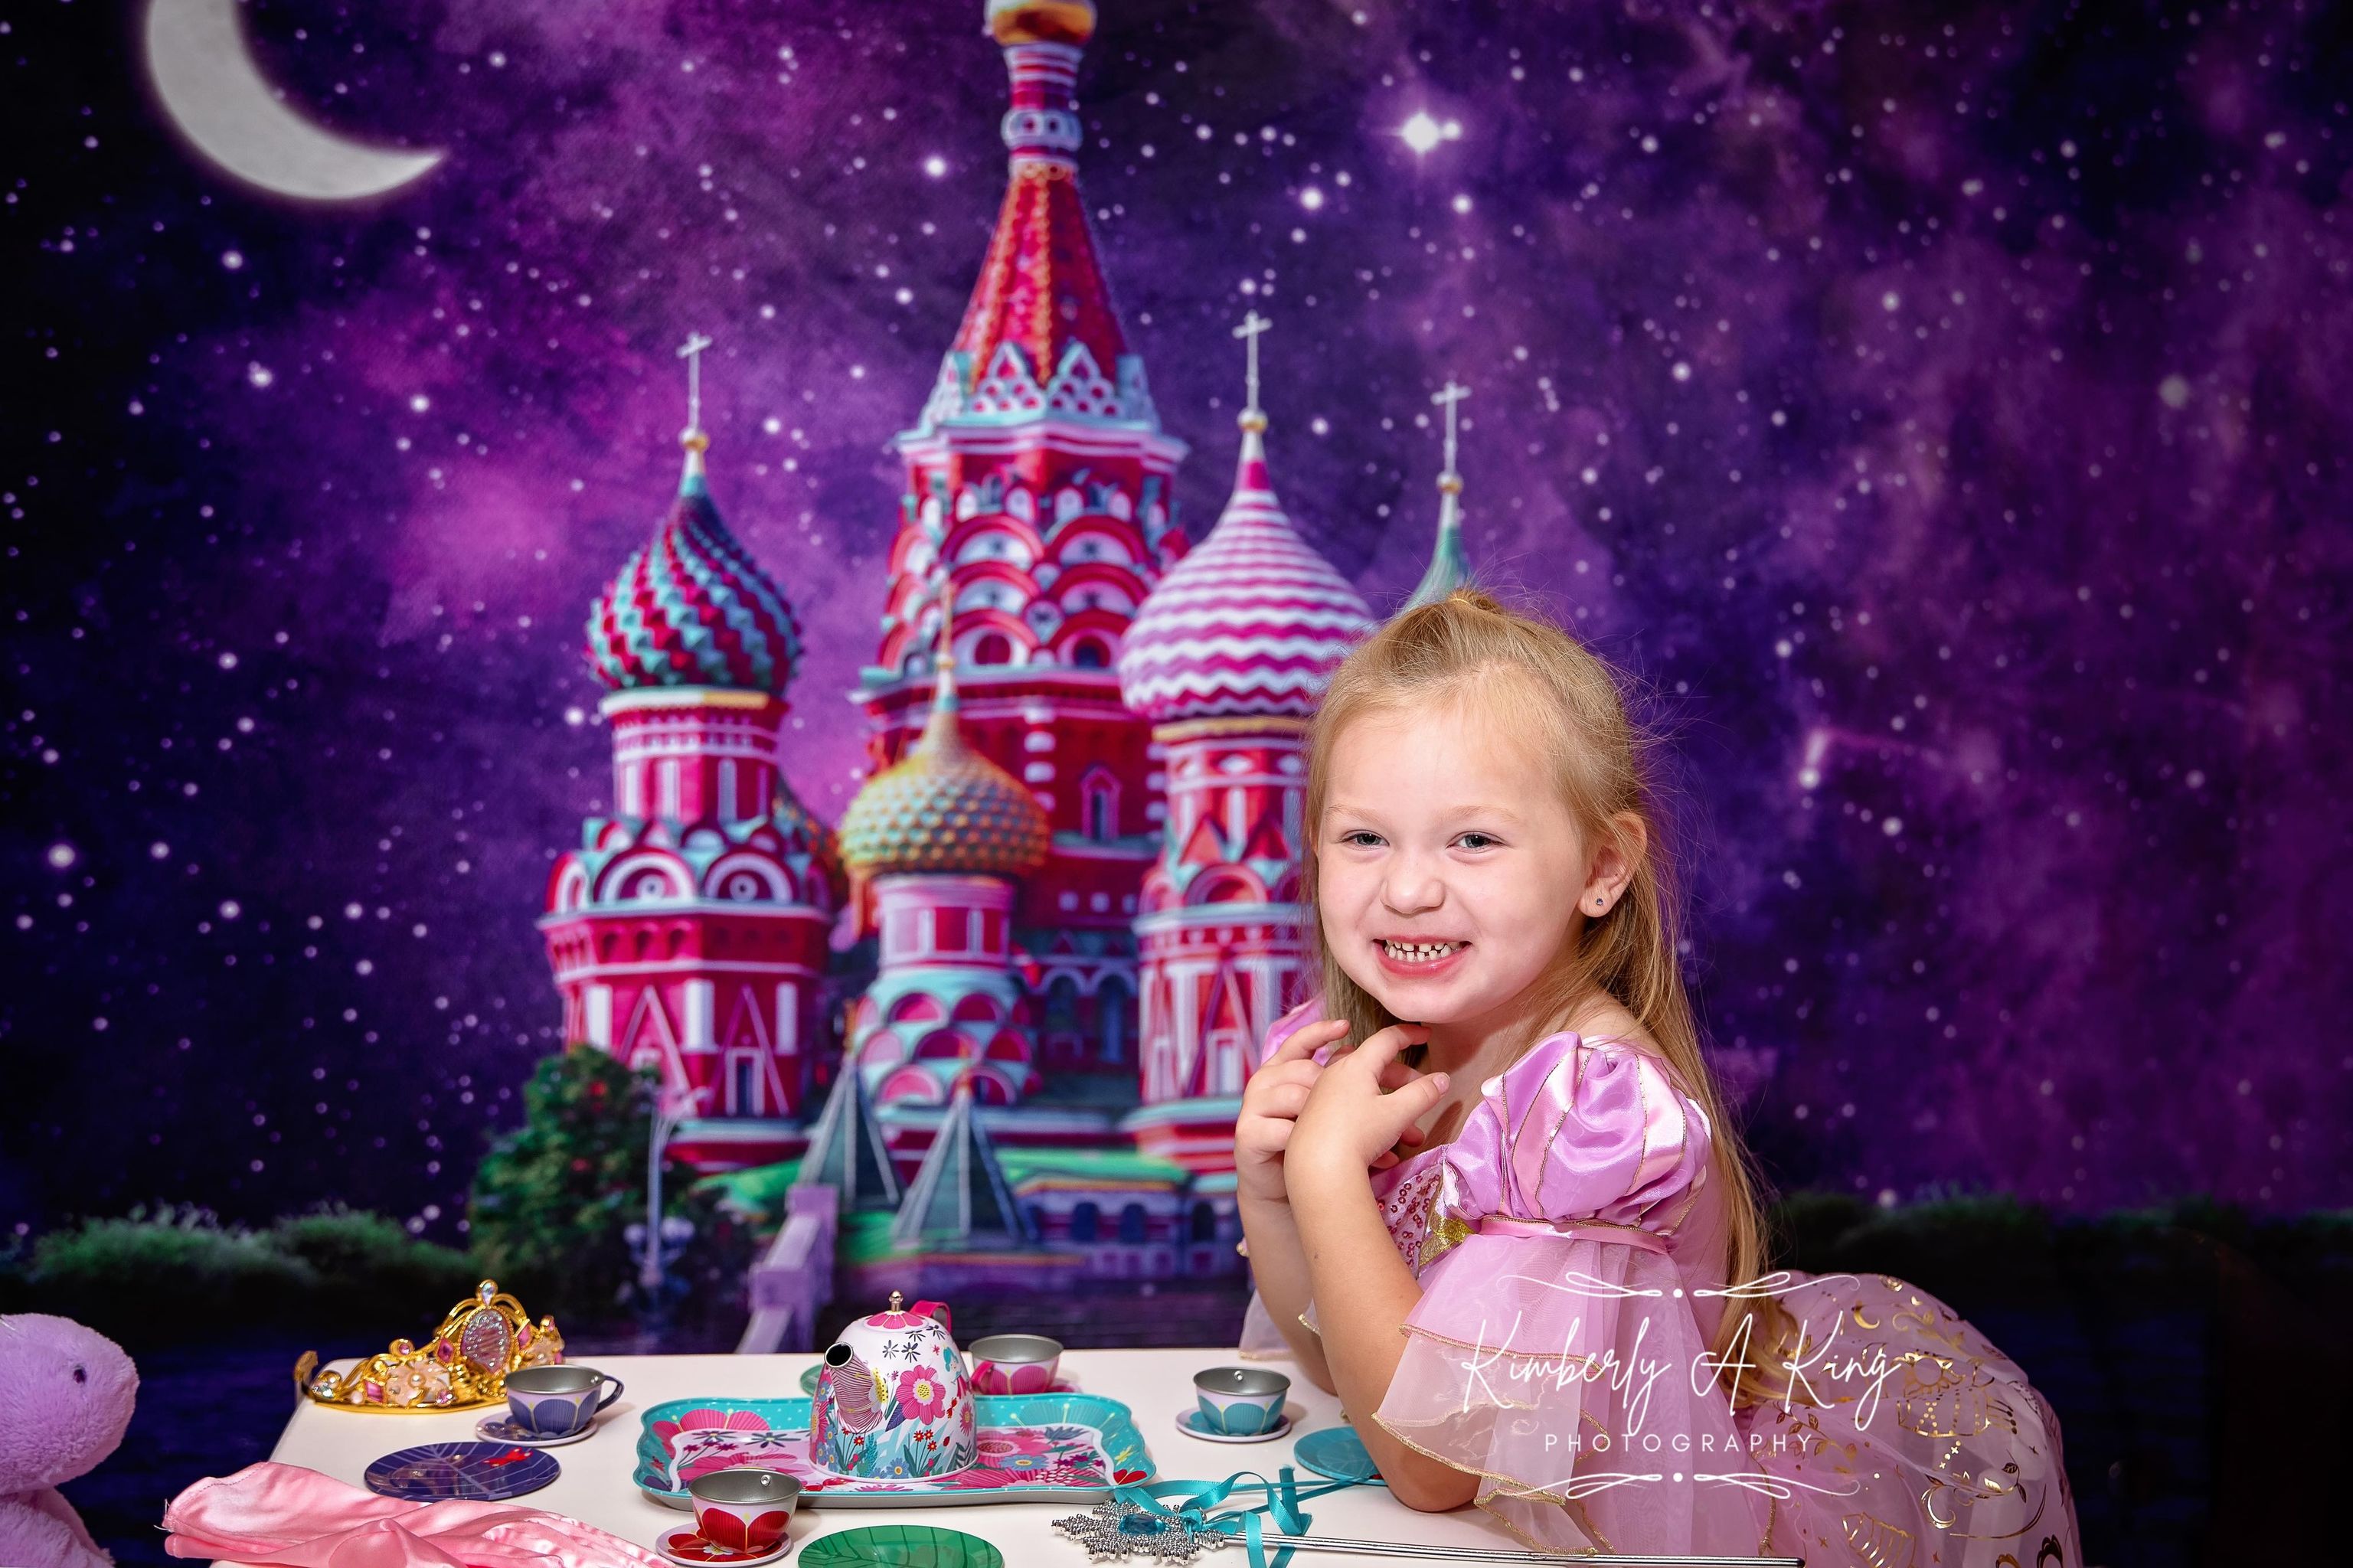 Kate Starry Night Colorful Castle Moon Purple Backdrop for Photography